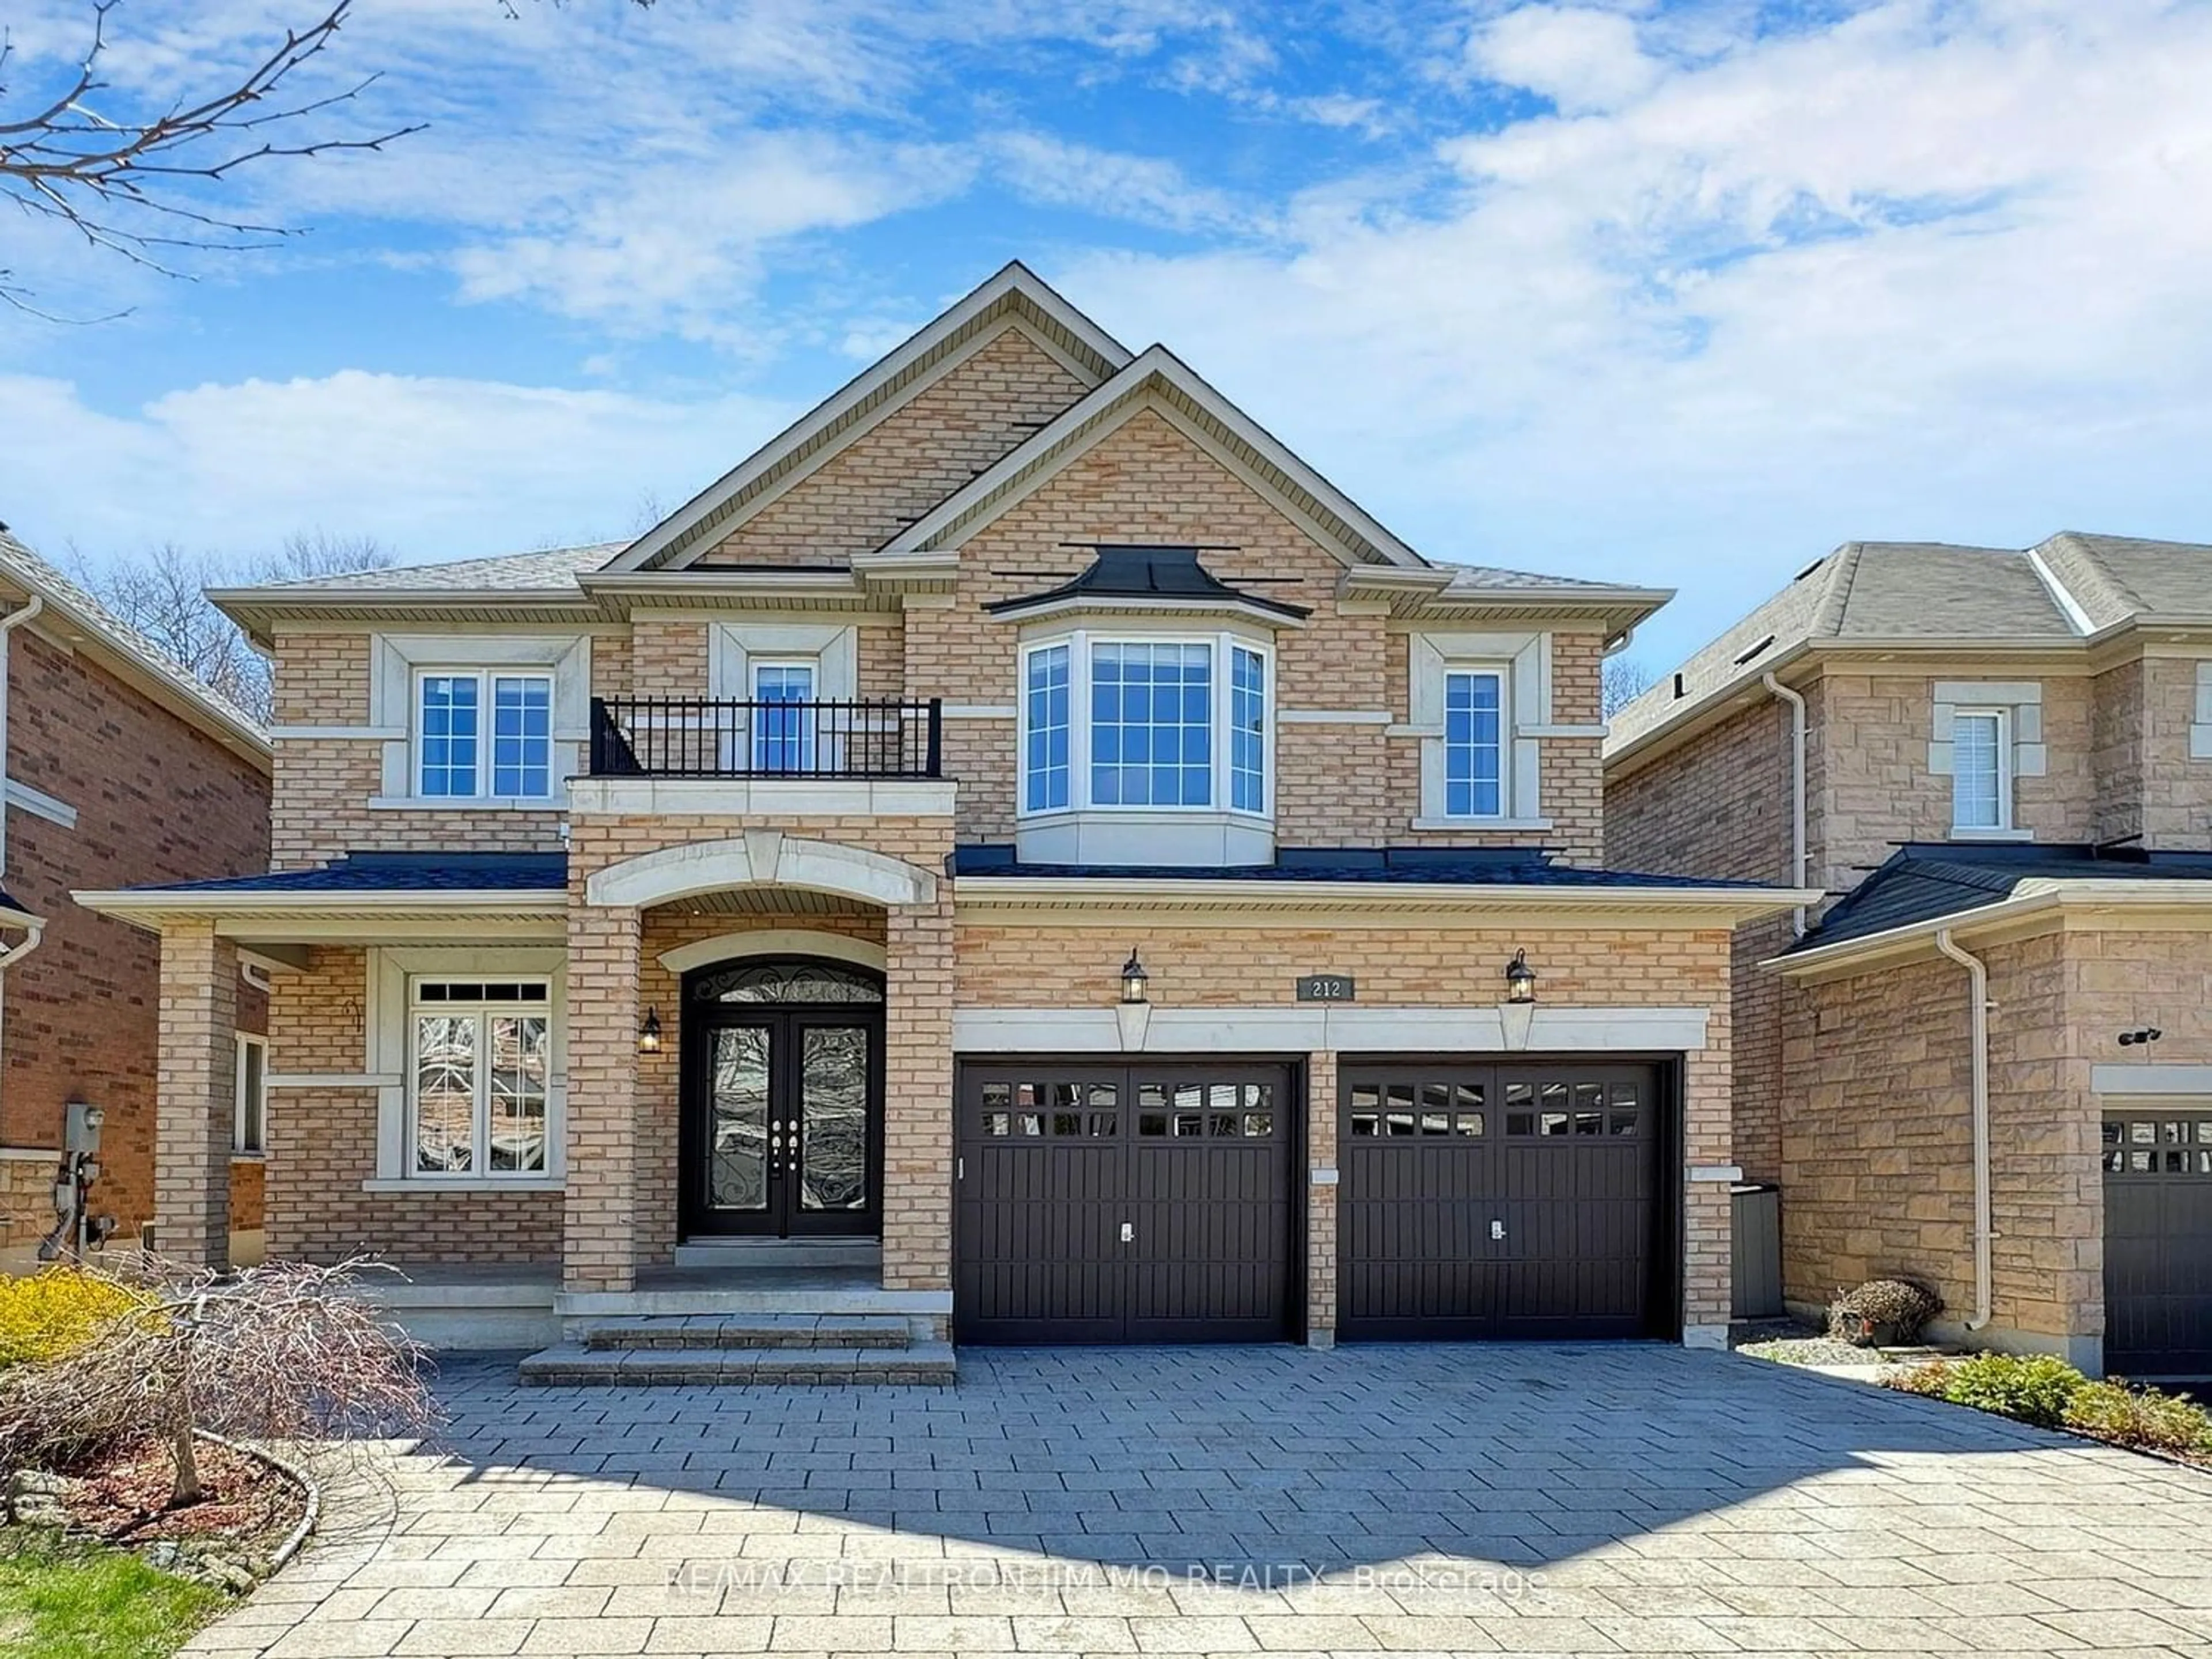 Home with brick exterior material for 212 Golden Forest Rd, Vaughan Ontario L6A 0S7